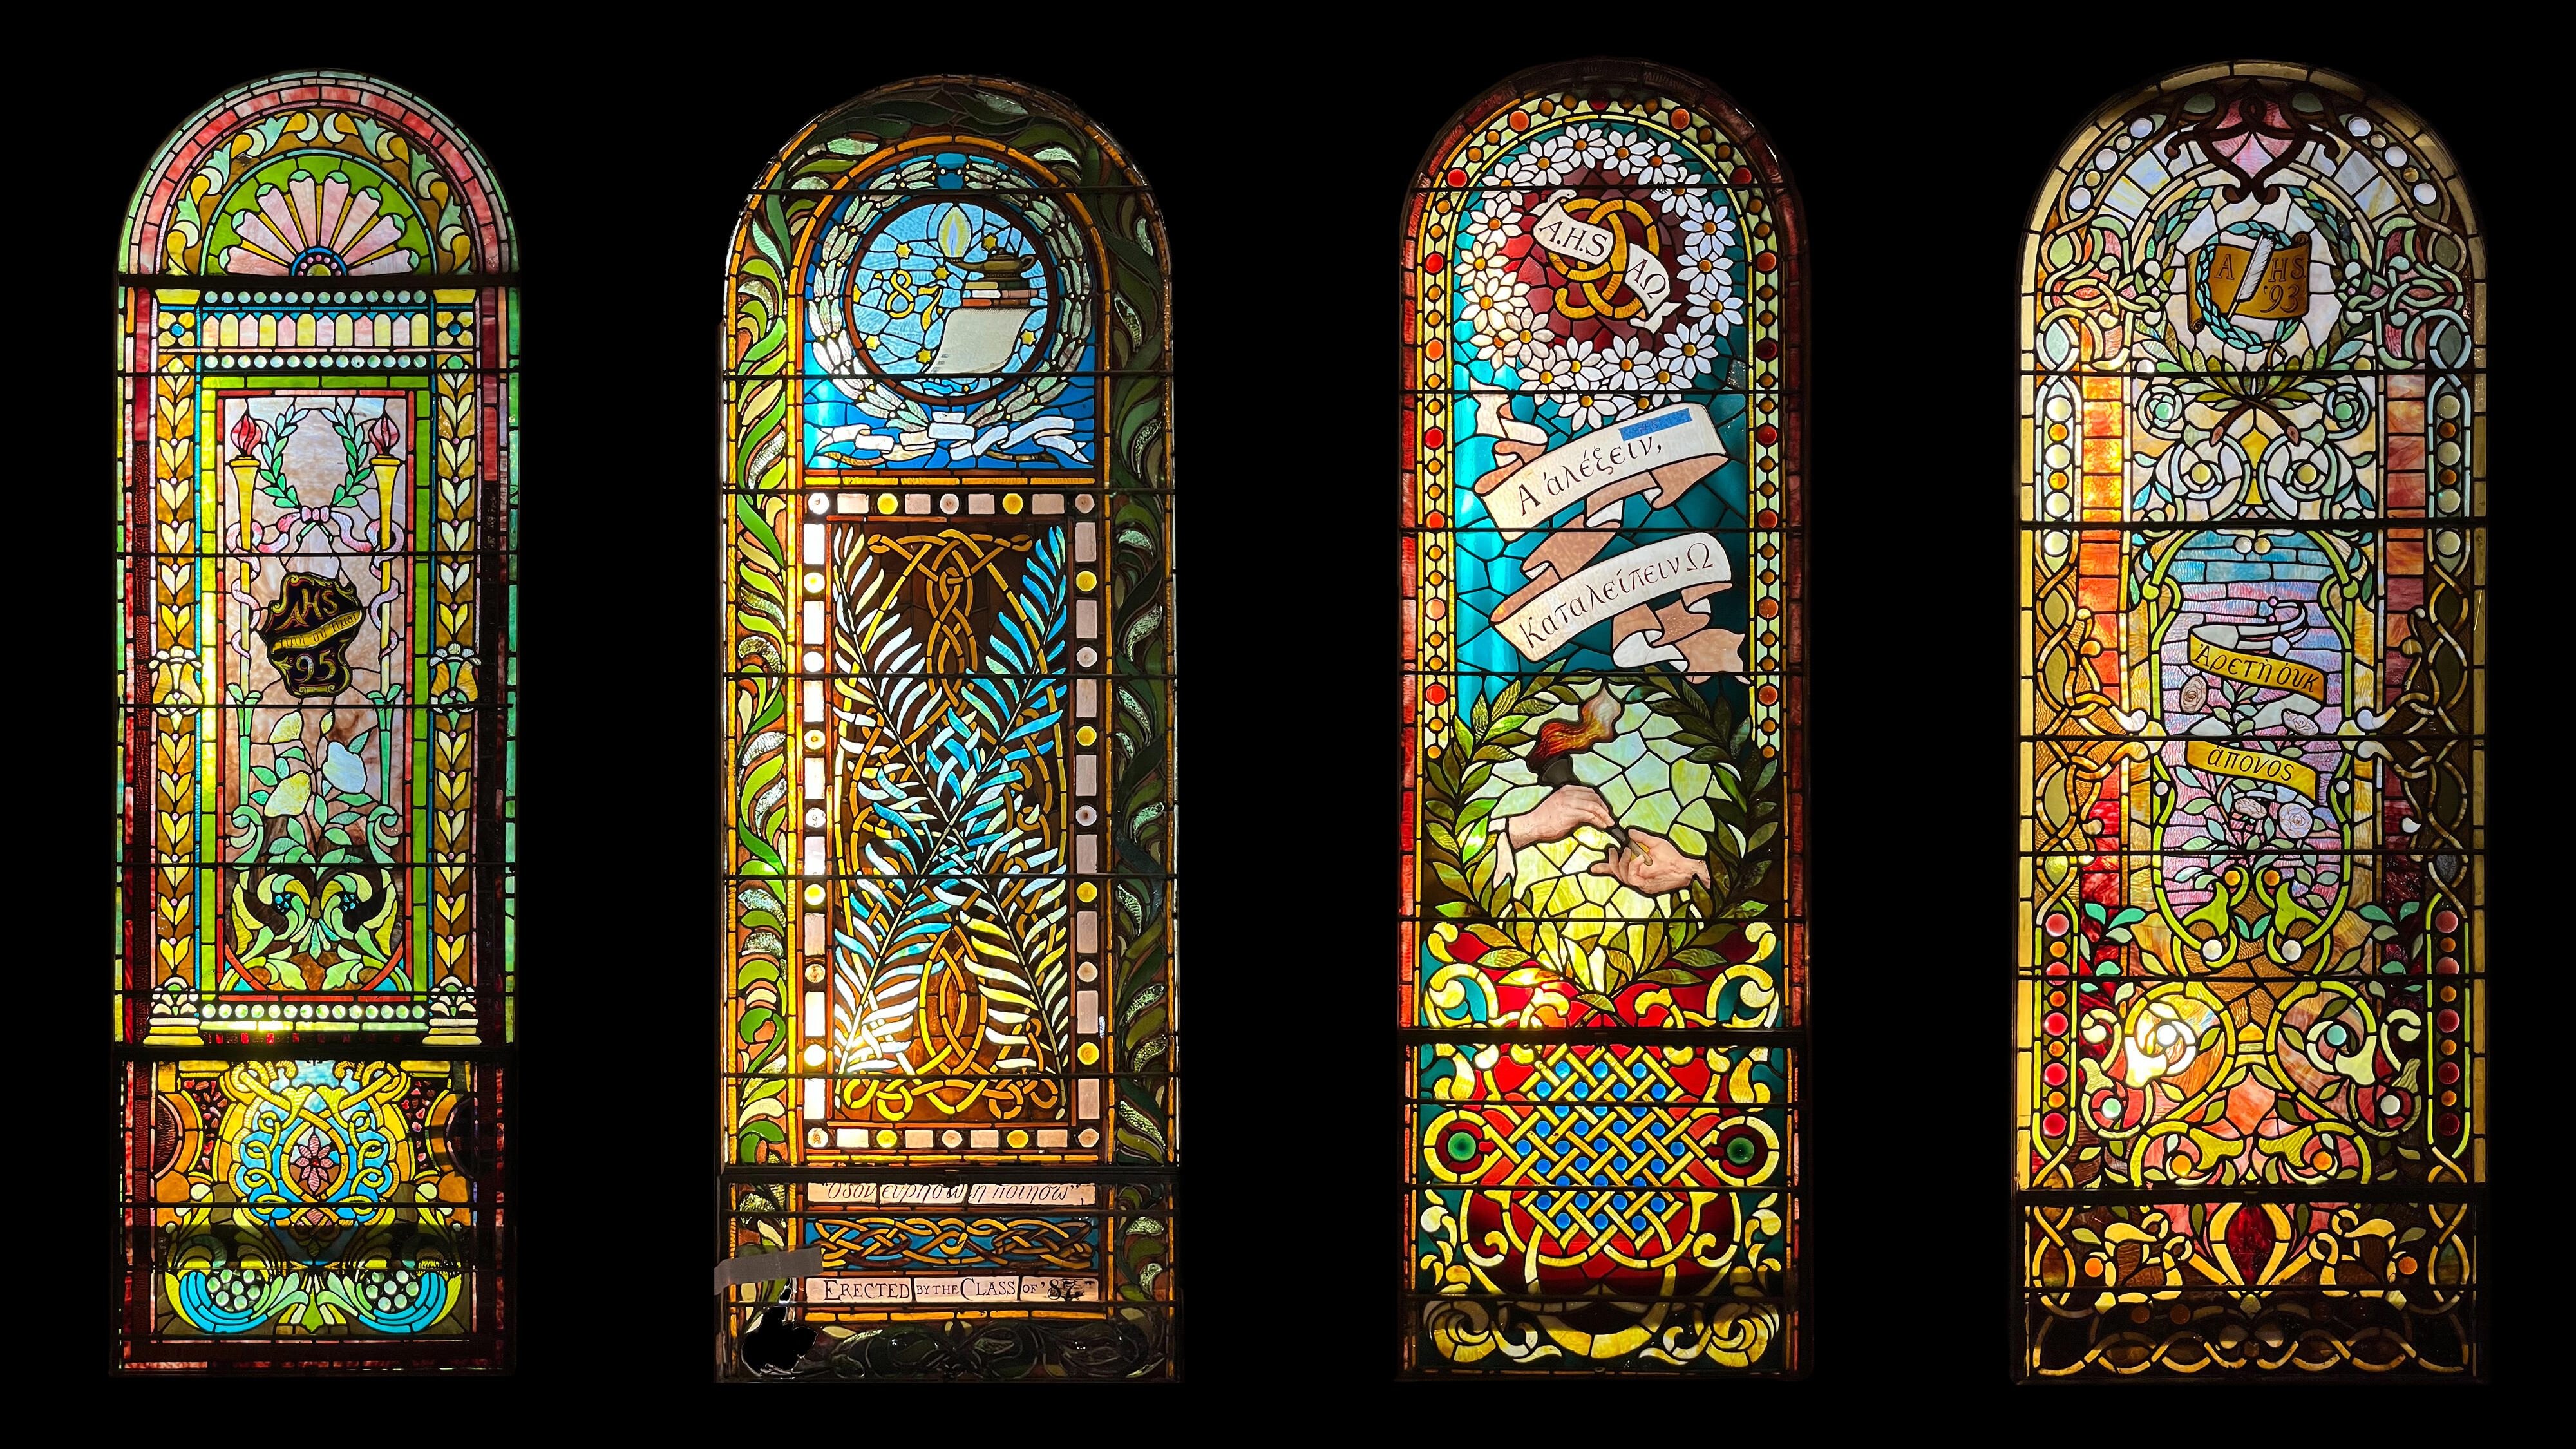 Four historic Albany High School stained glass windows